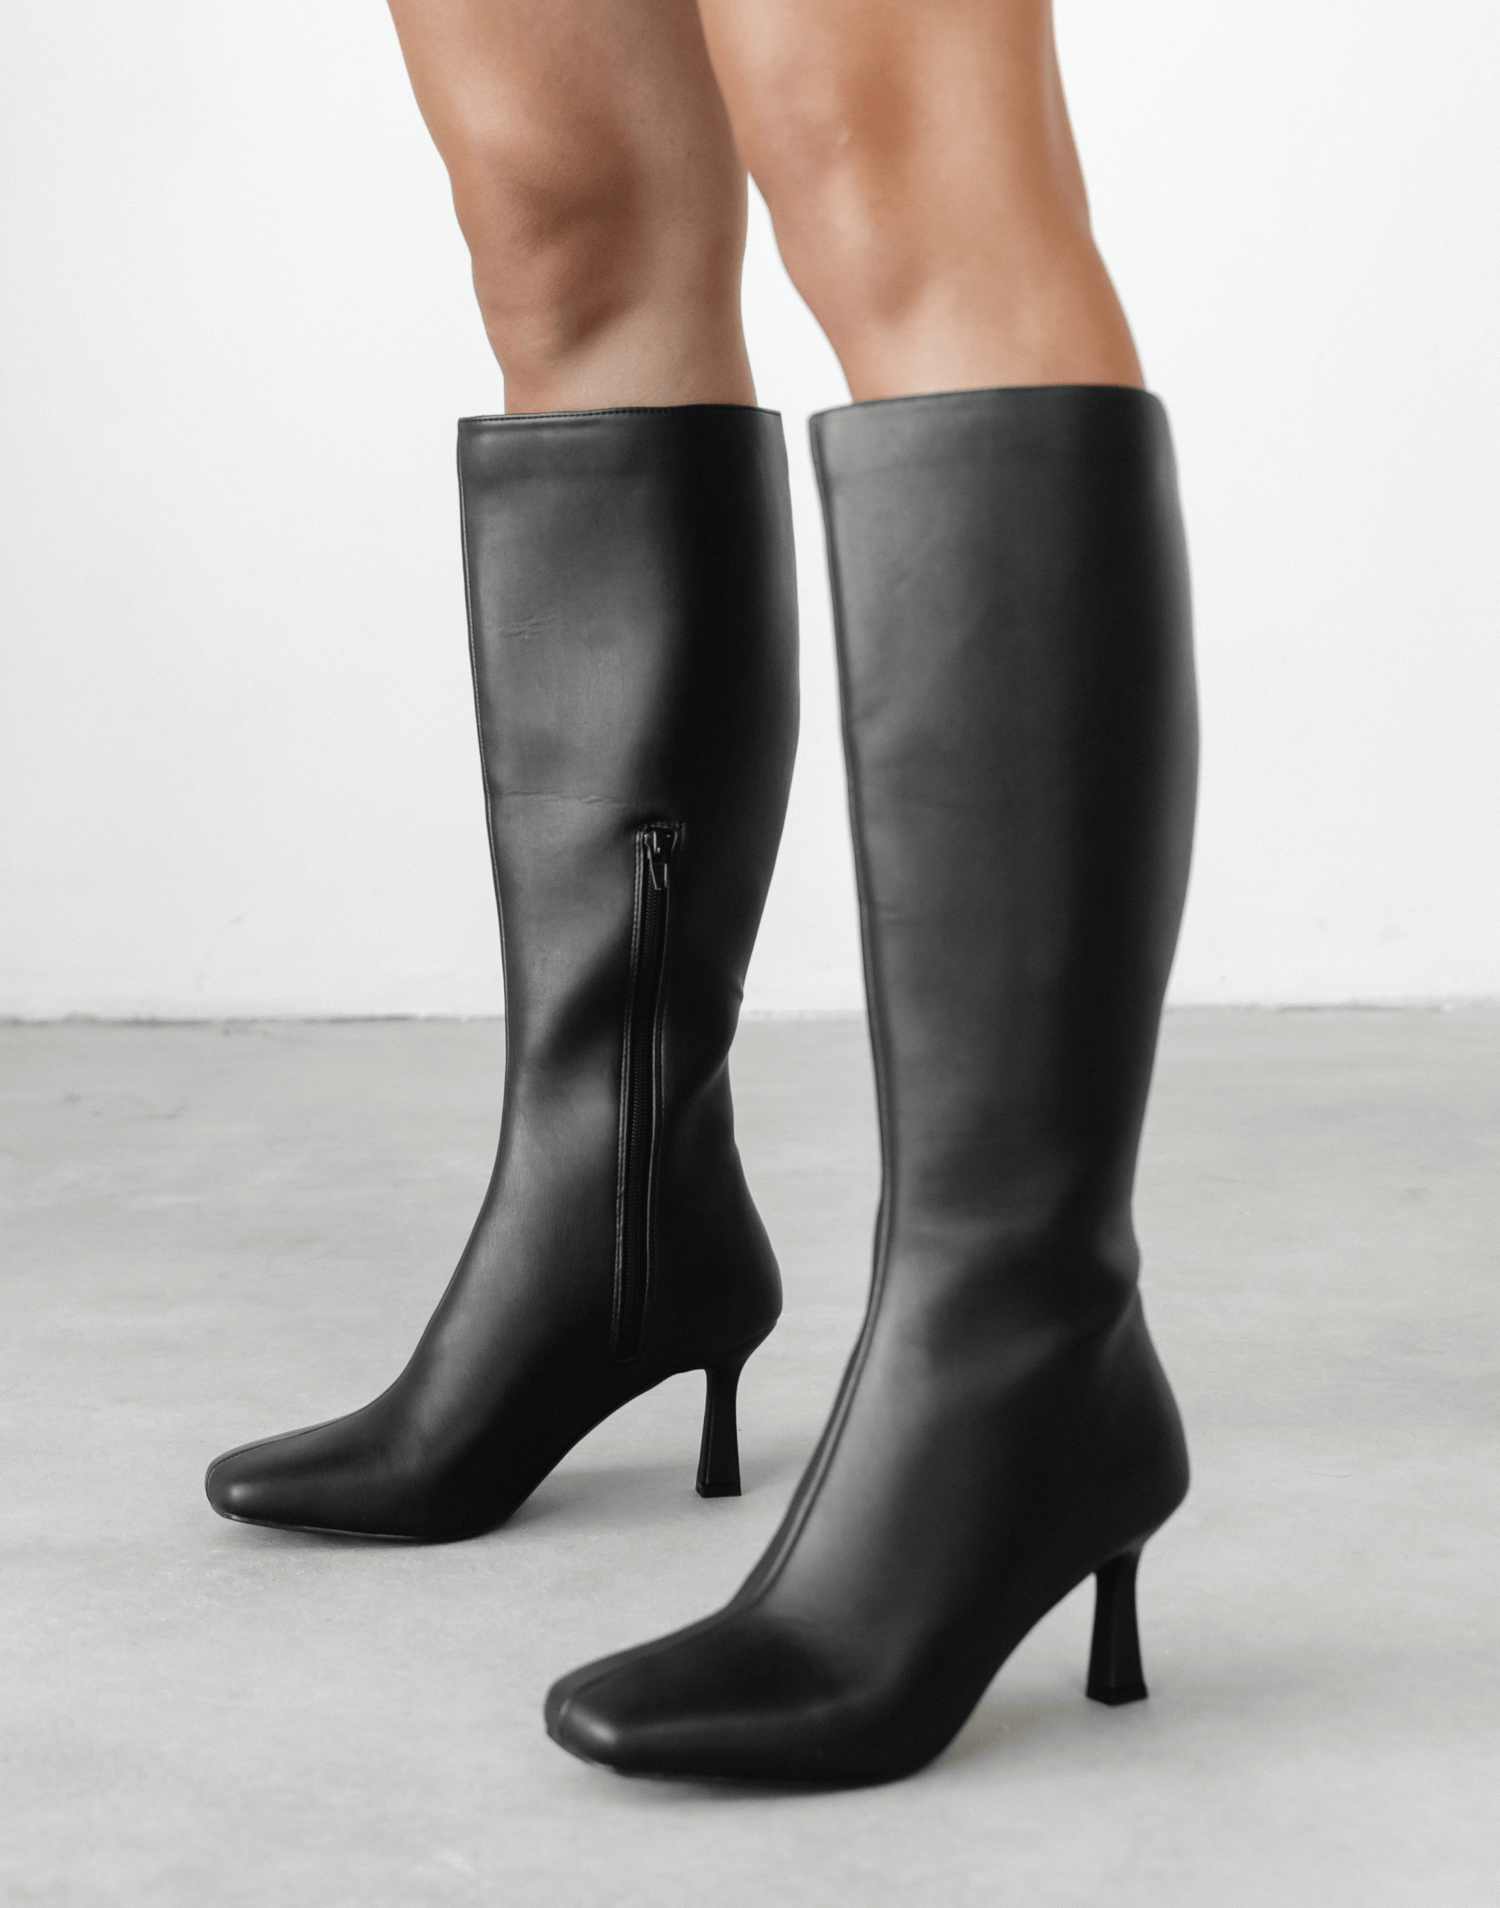 Candid Boots (Black) - By Therapy – CHARCOAL